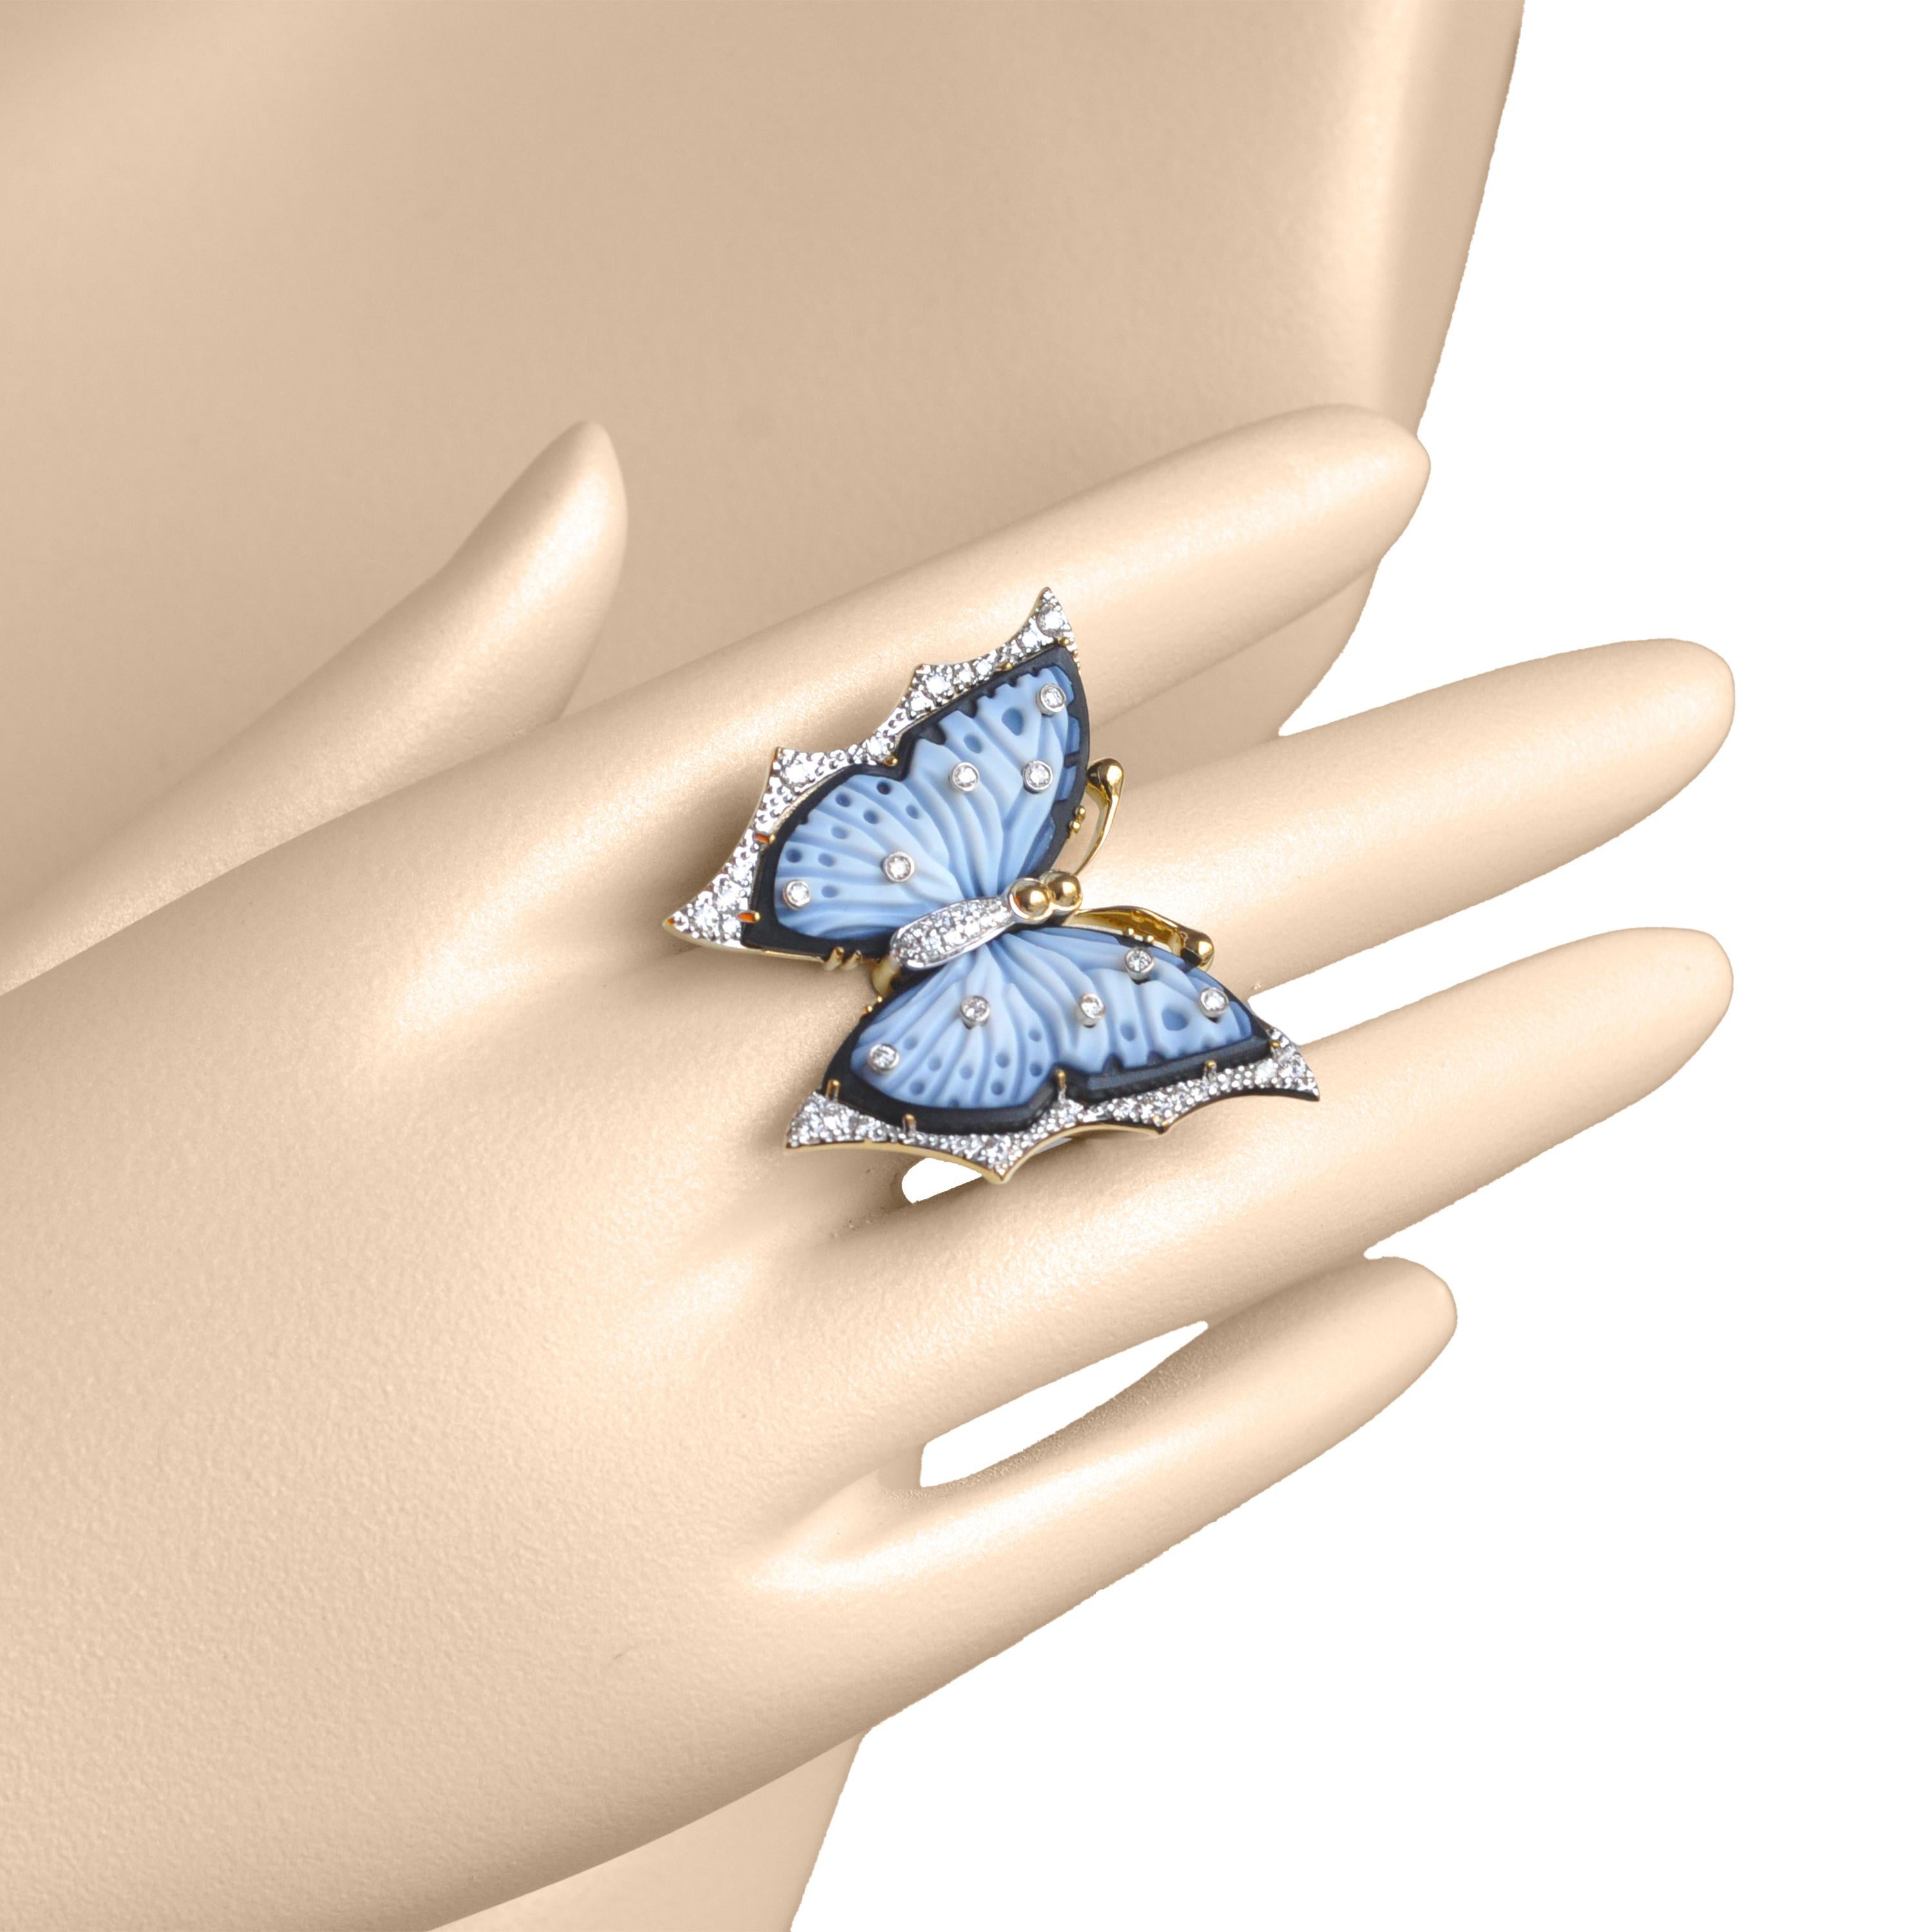 18 karat yellow gold hand-carved natural agate butterfly  cocktail ring.

Embrace nature's metamorphosis with our 18k gold hand-carved agate butterfly cocktail diamond ring. Meticulously carved, two agate pieces evolve into a stunning butterfly